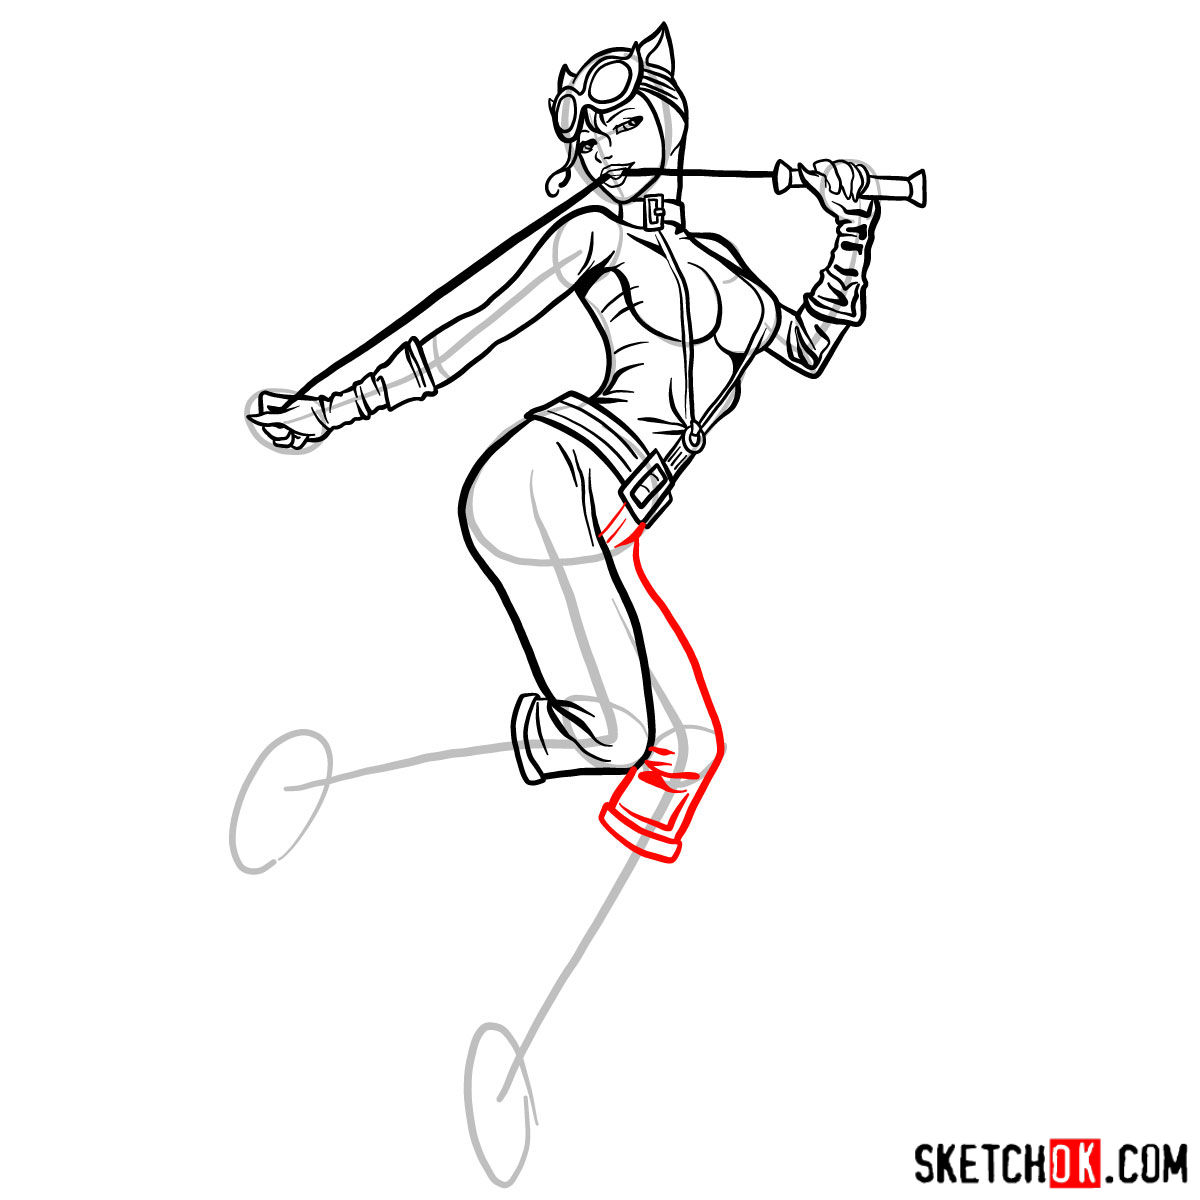 How to draw Catwoman superheroine from DC Comics - step 14